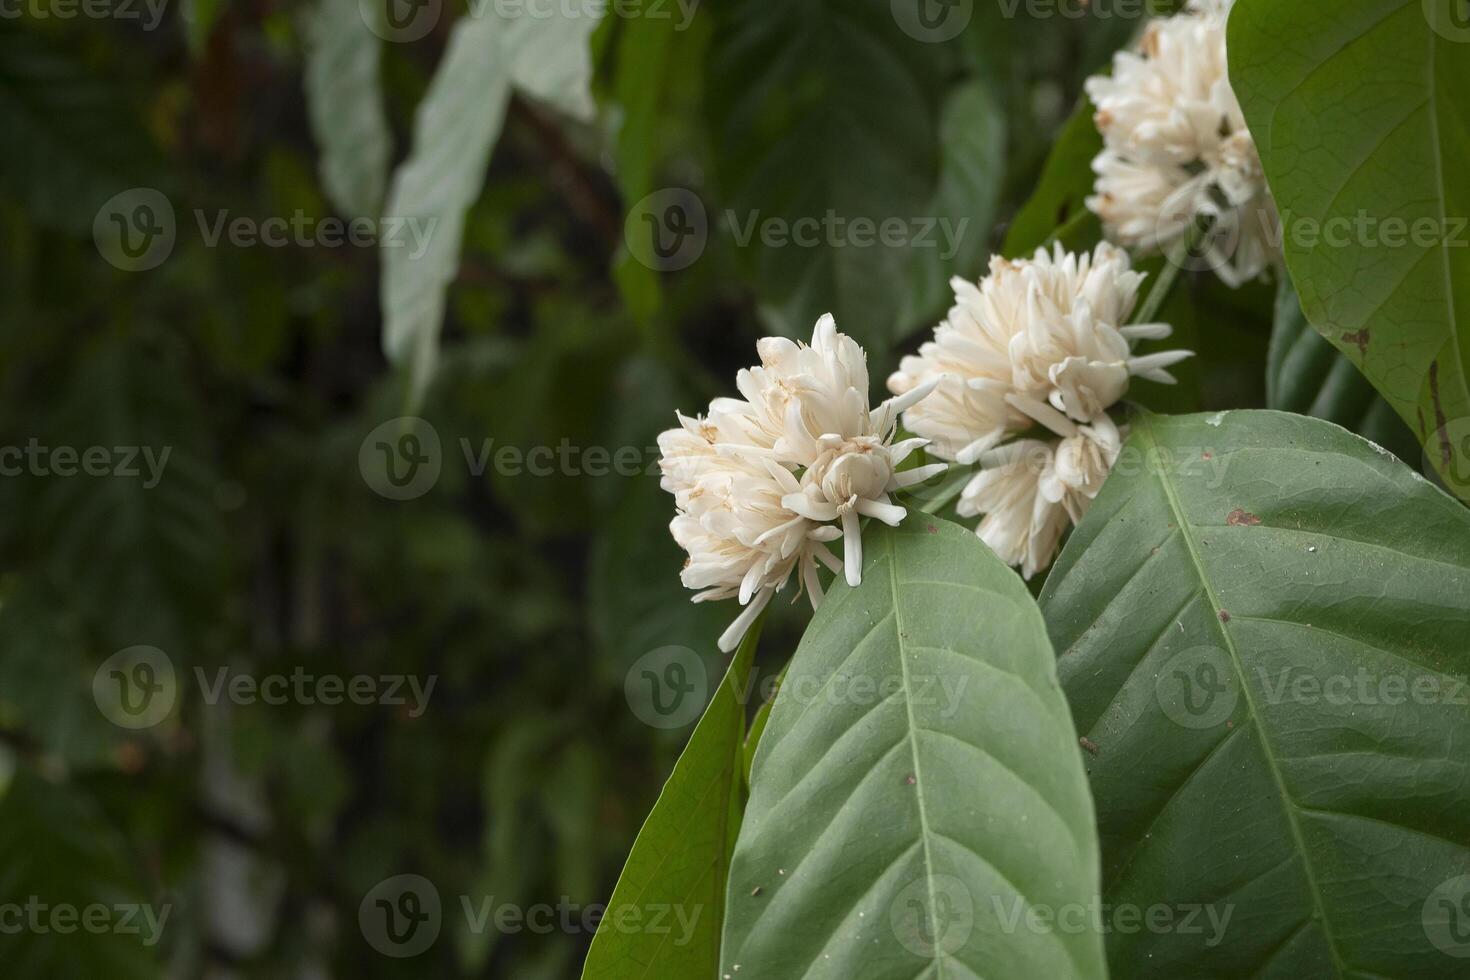 The beauty of white coffee flowers on a tree in a blossoming garden, in the colorful, natural setting photo